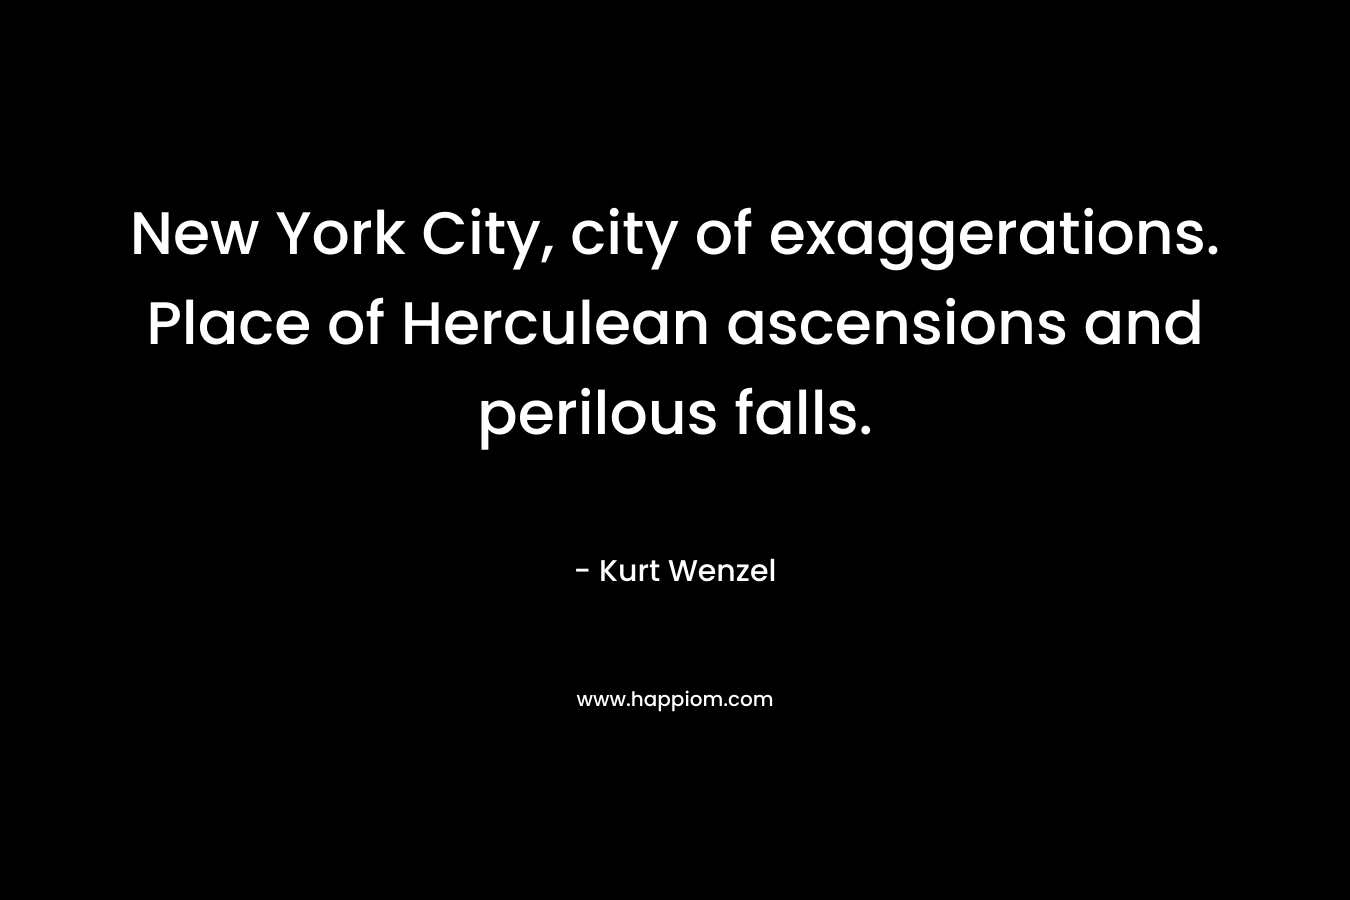 New York City, city of exaggerations. Place of Herculean ascensions and perilous falls.